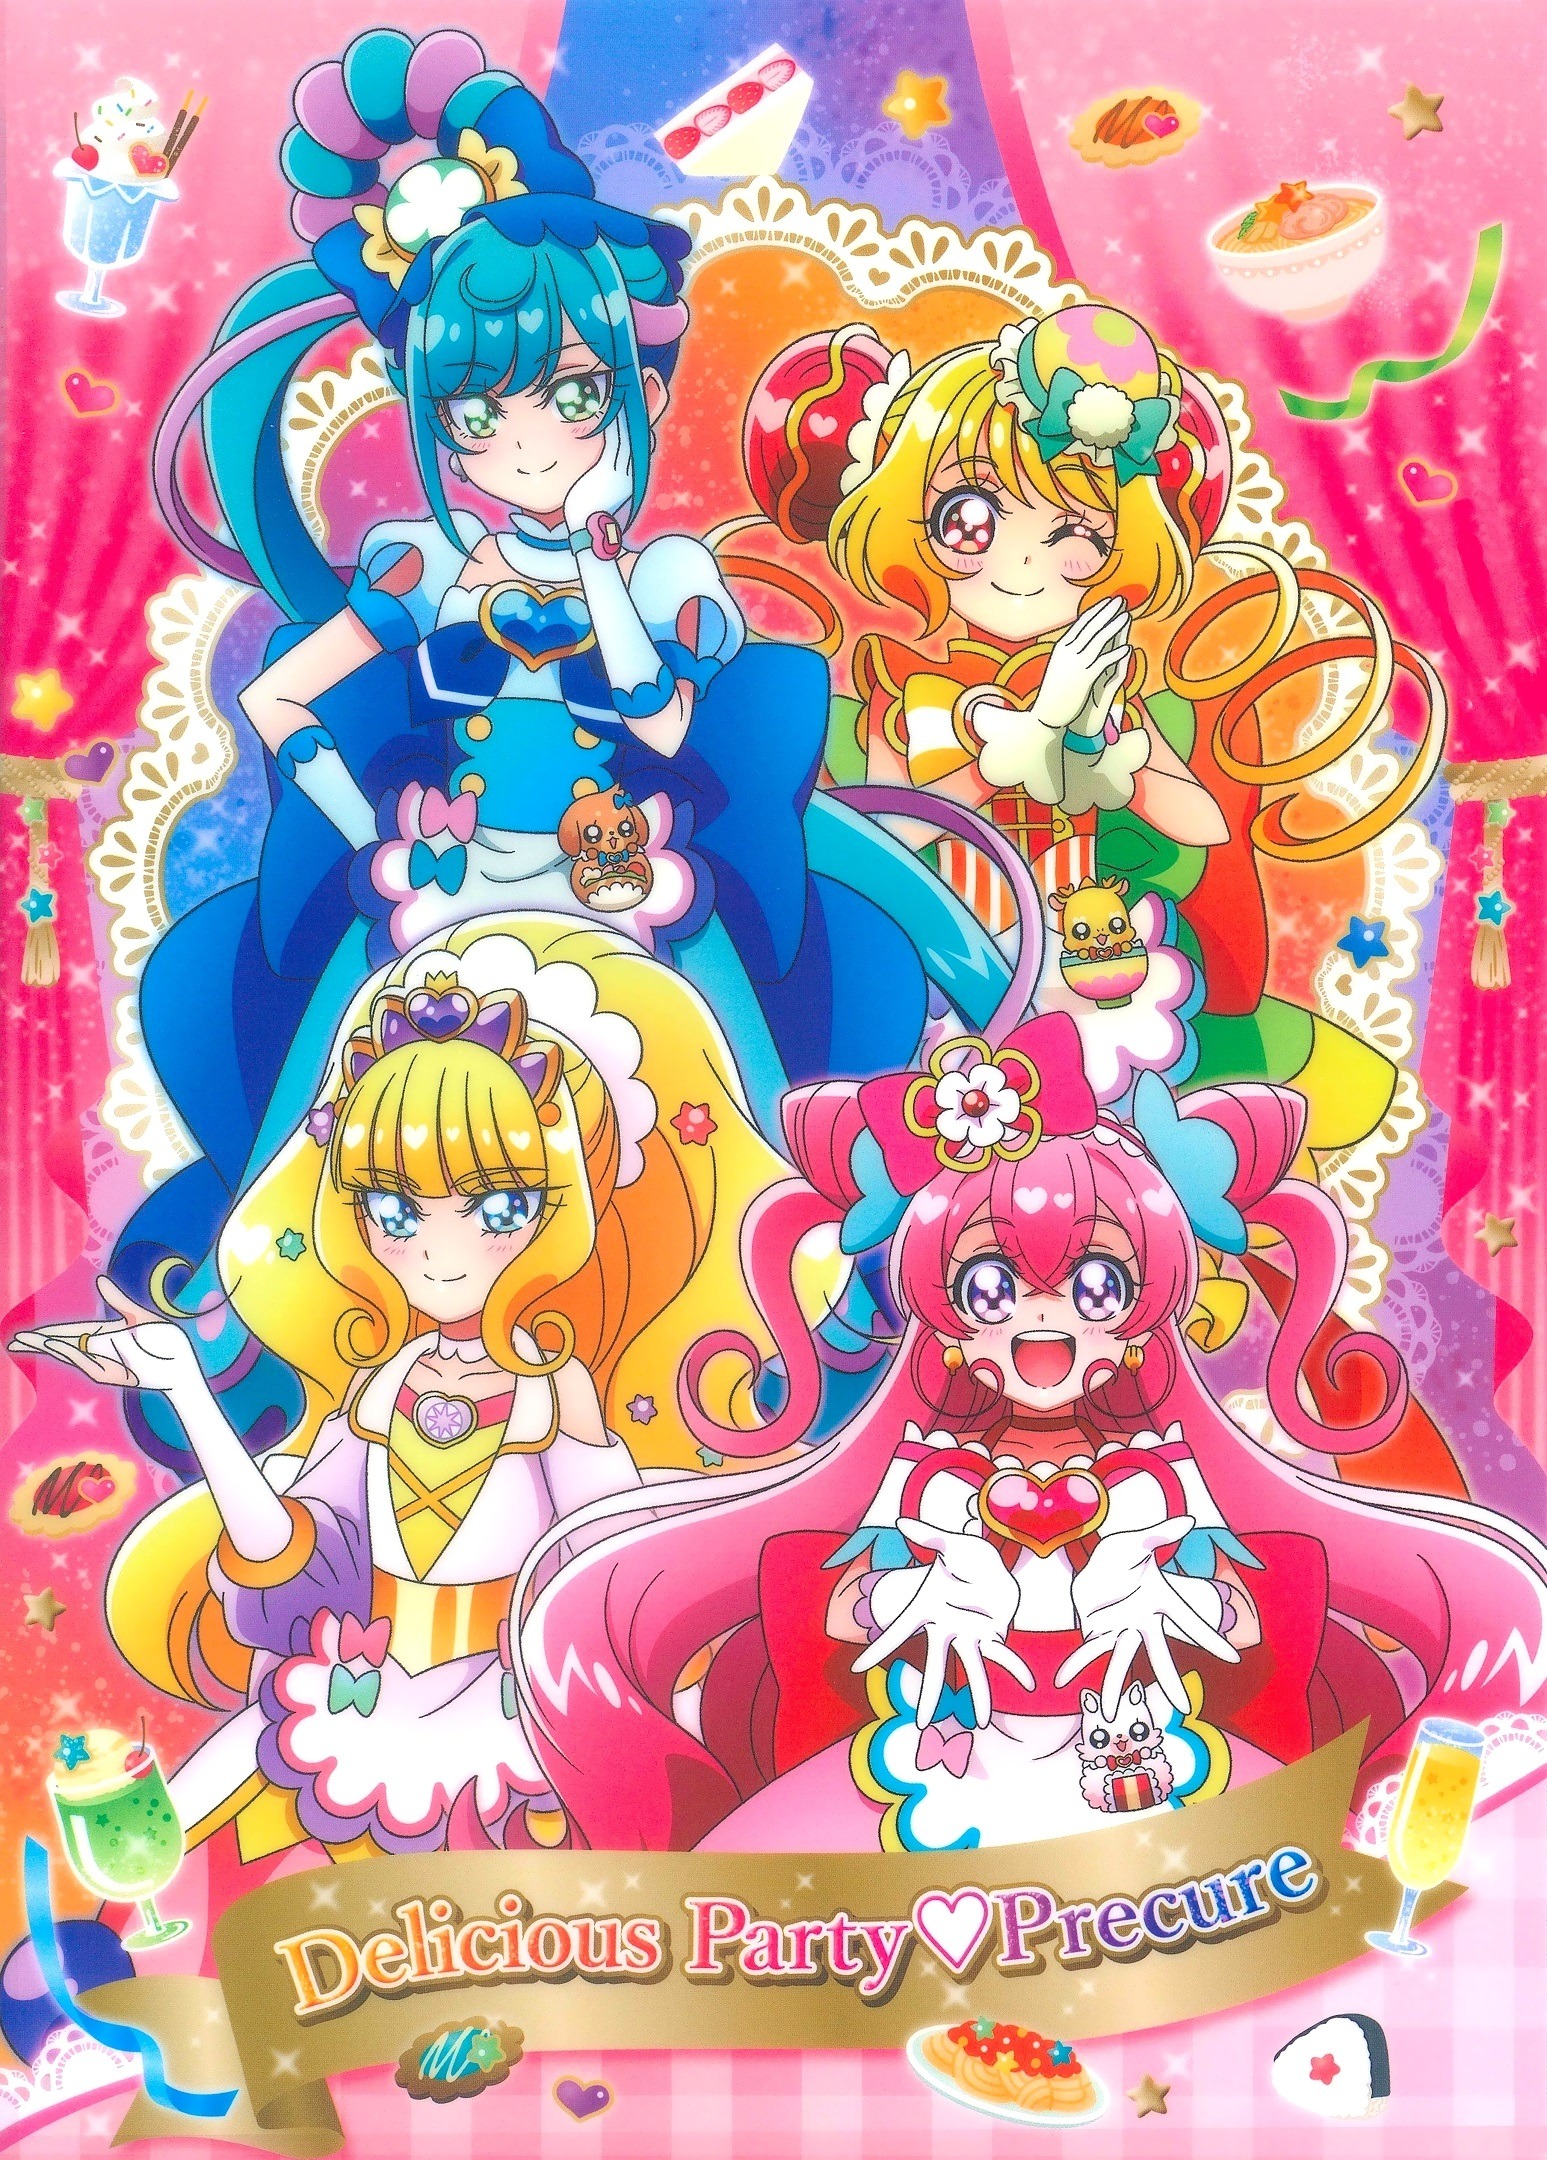 Delicious Party♡Precure Image by Toei Animation #3806758